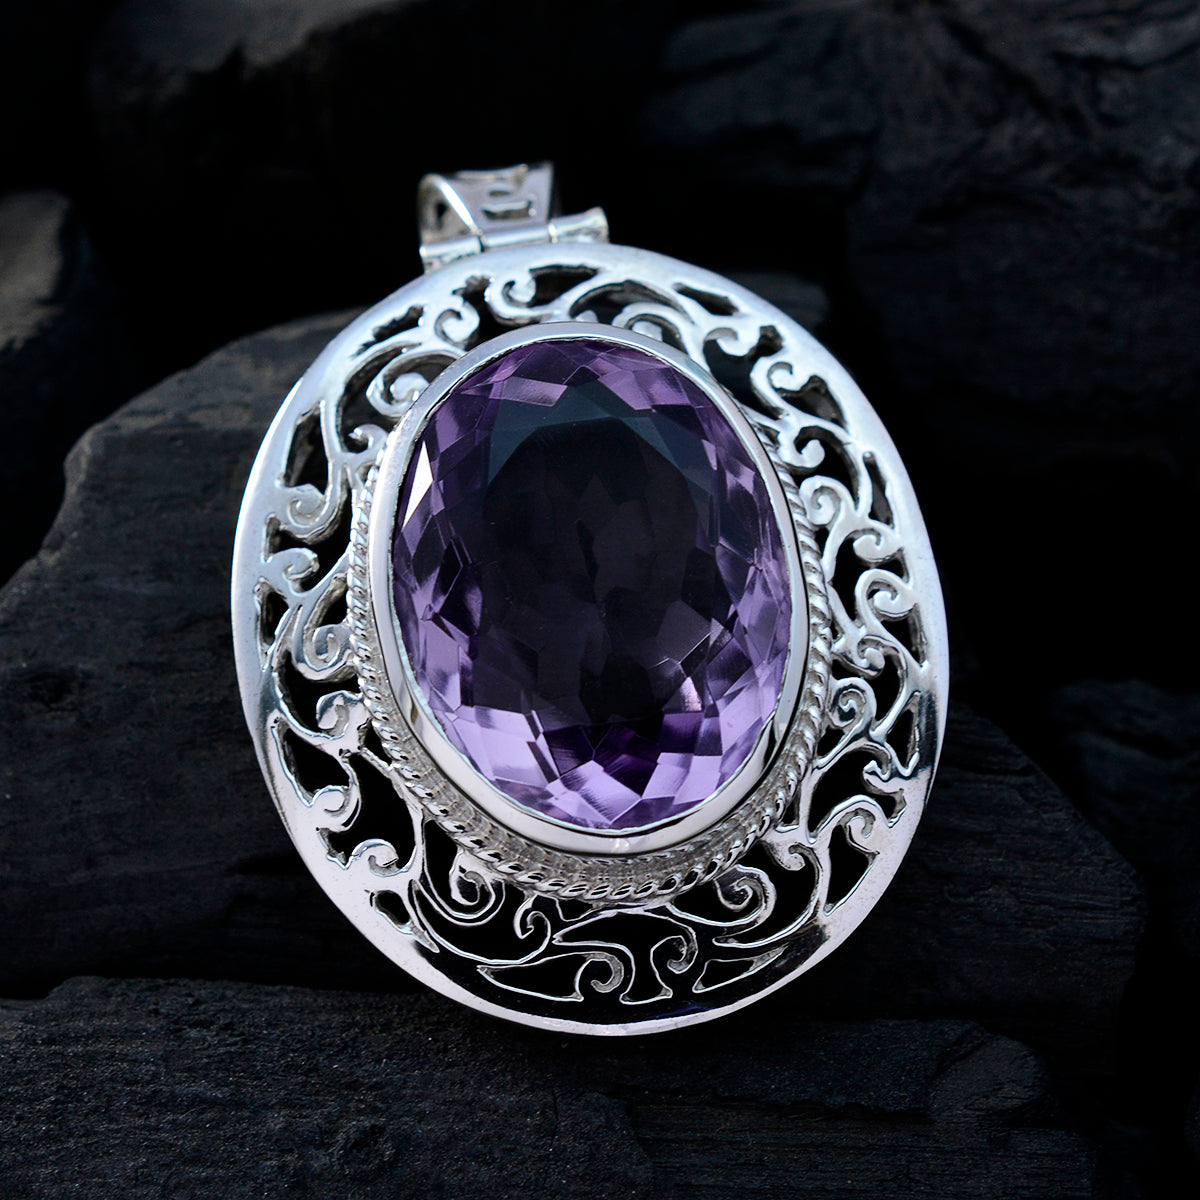 Riyo Real Gemstones Oval Faceted Purple Amethyst 925 Sterling Silver Pendant gift fordaughter day